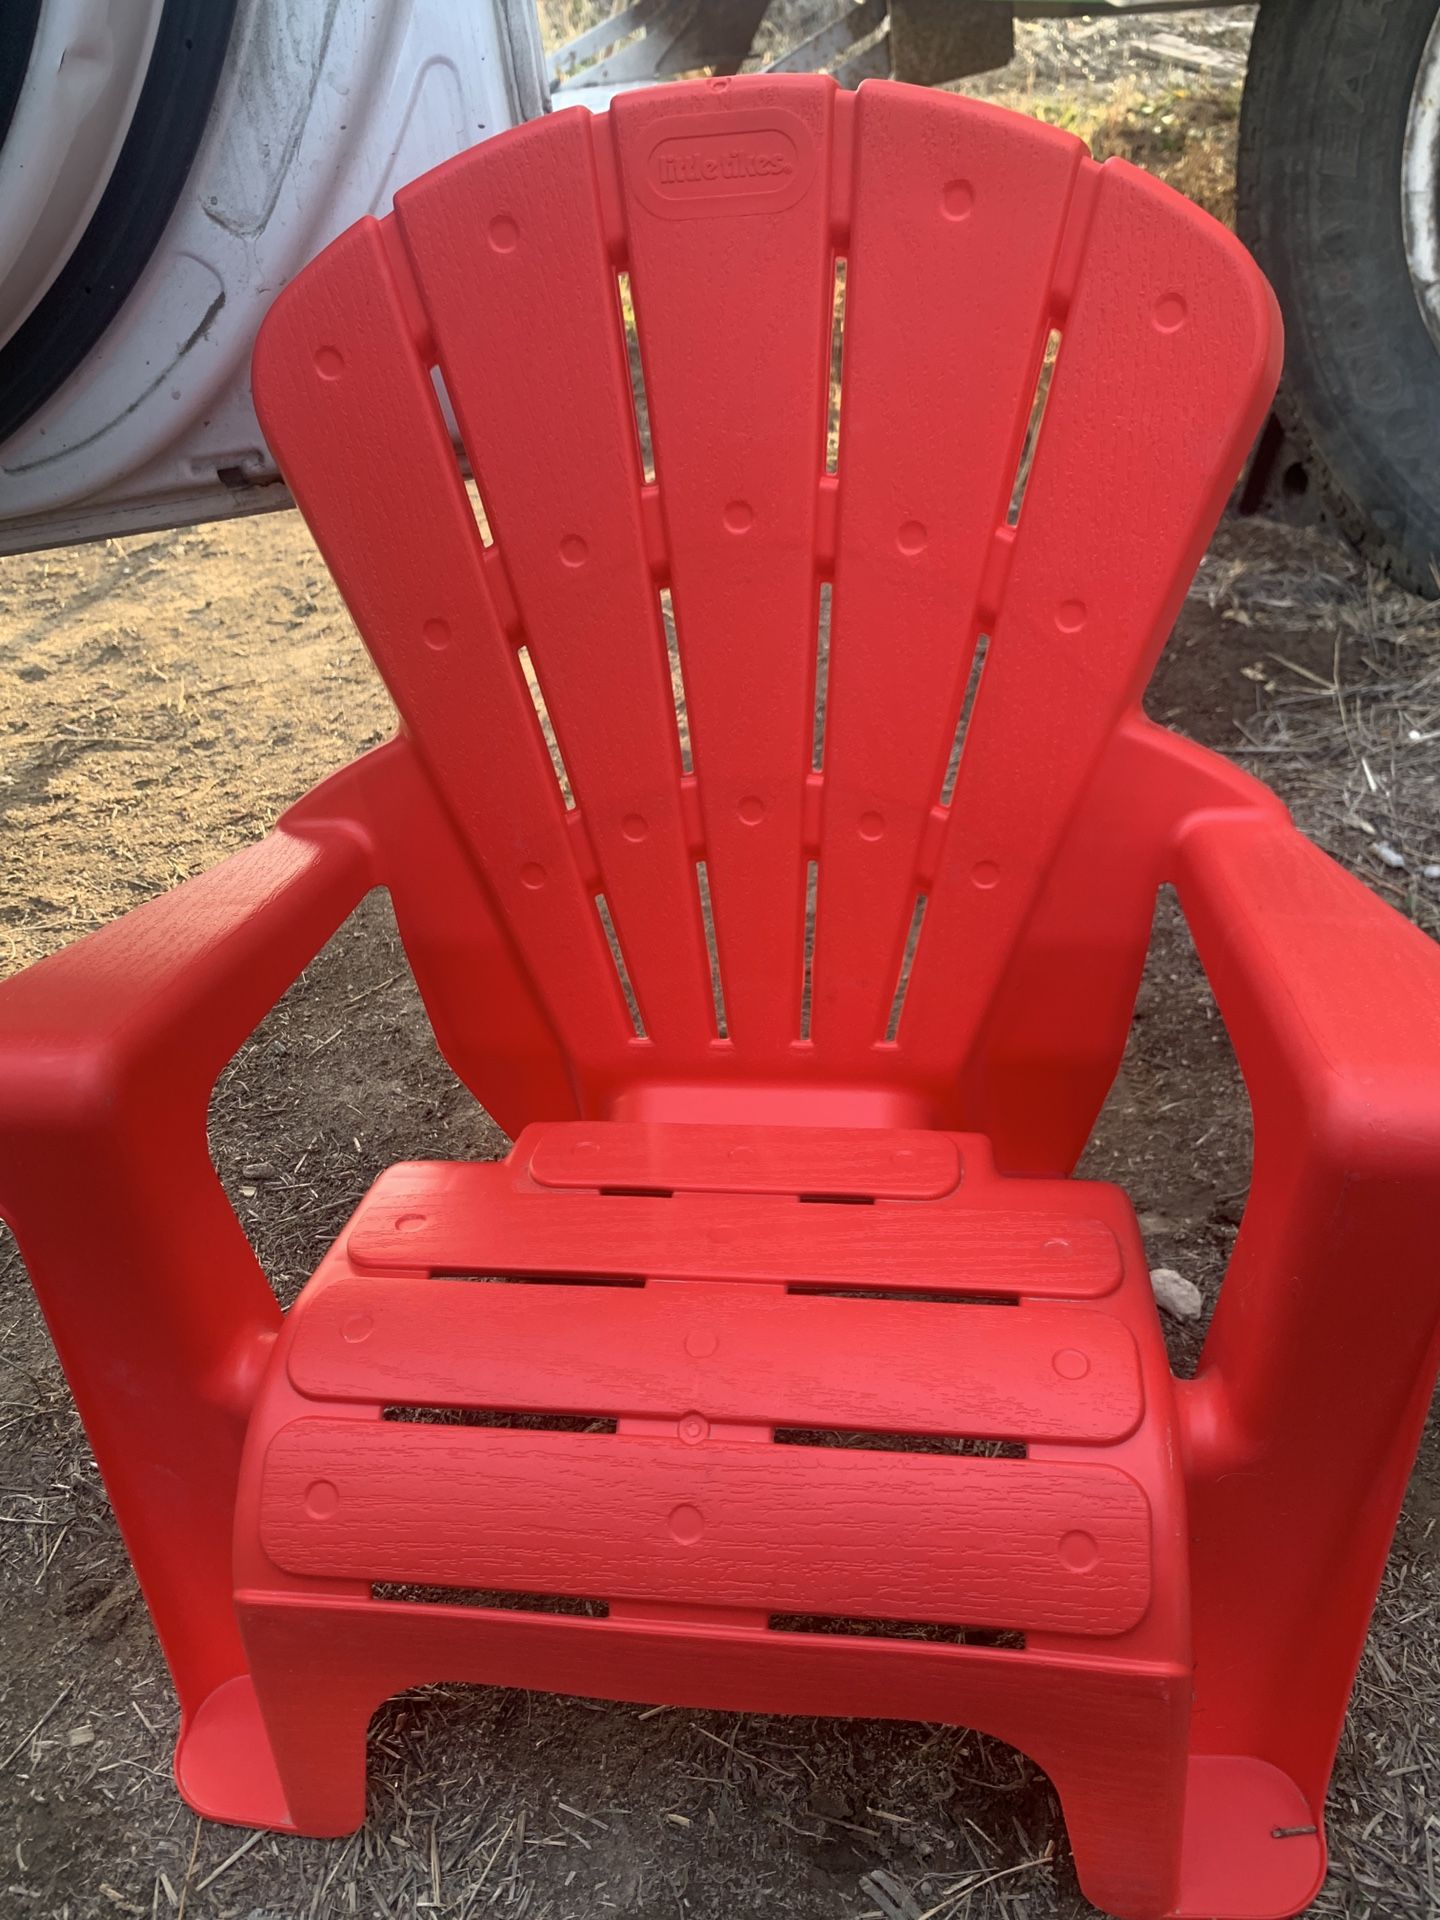 Child’s Play Lawn Chair 